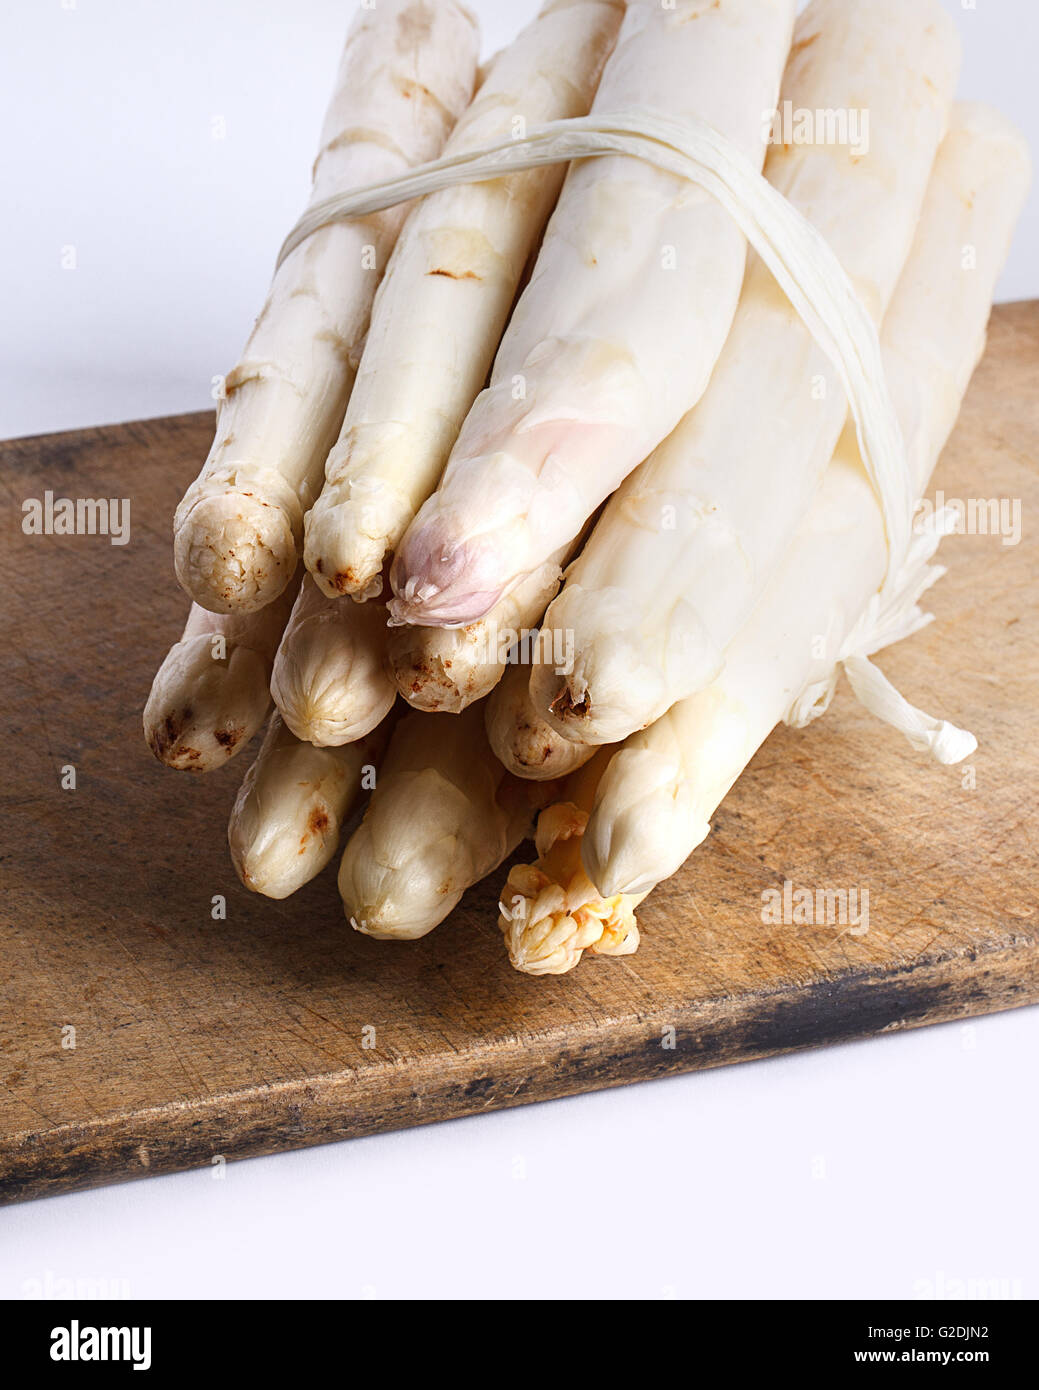 Bunch of fresh white asparagus spears ready to be used as an ingredient in cooking Stock Photo